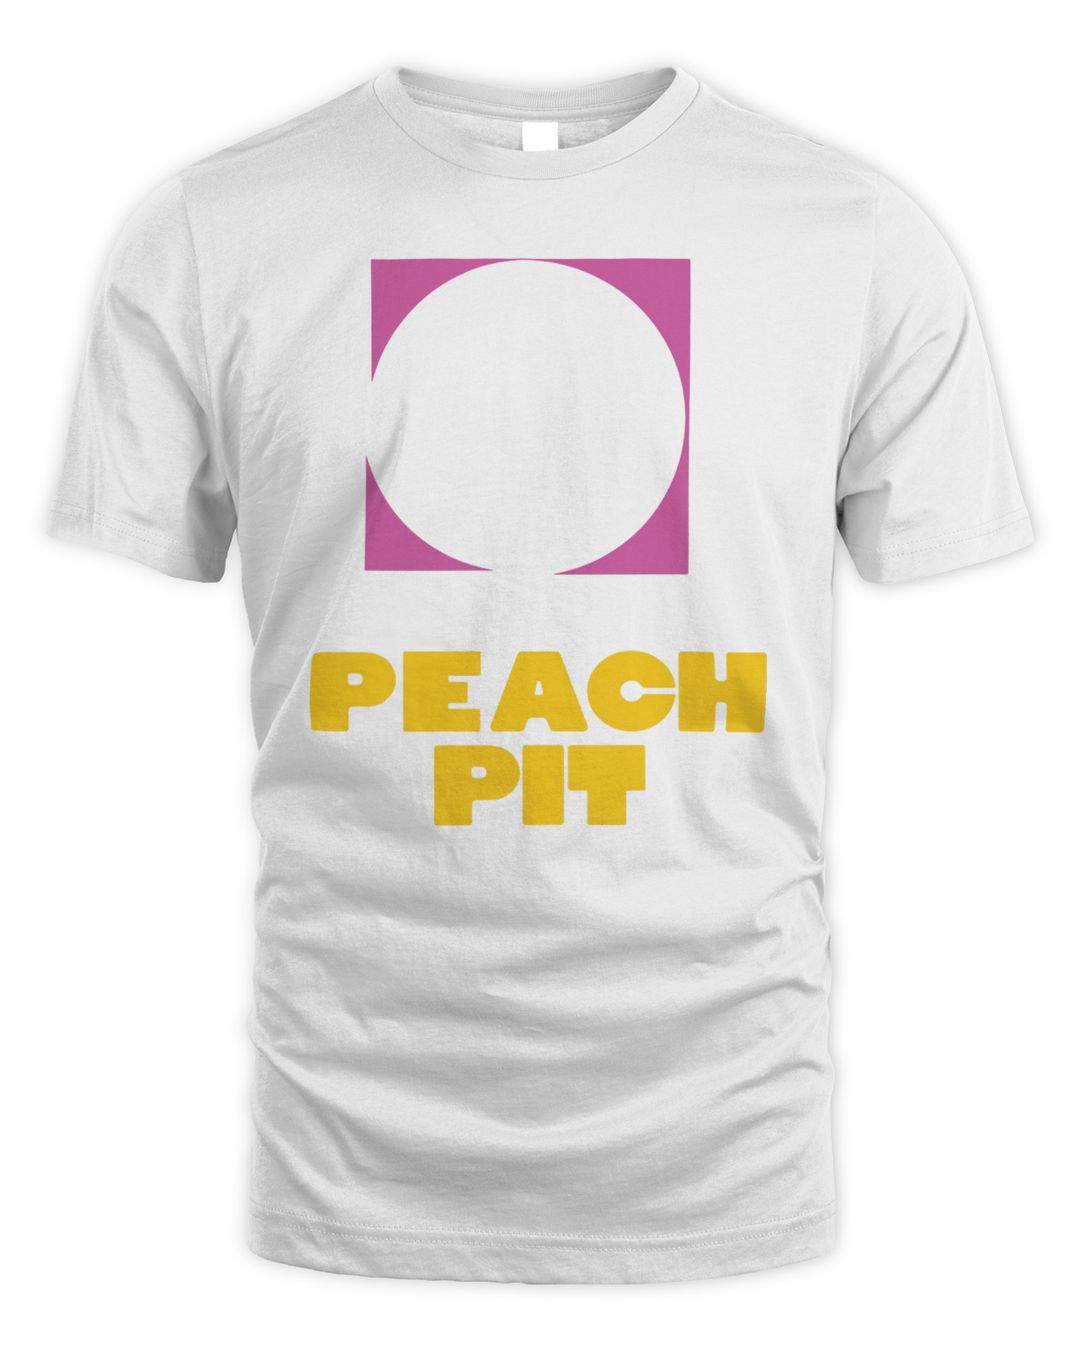 Peach Pit Merch Look Out From 2 To 3 Tour Shirt